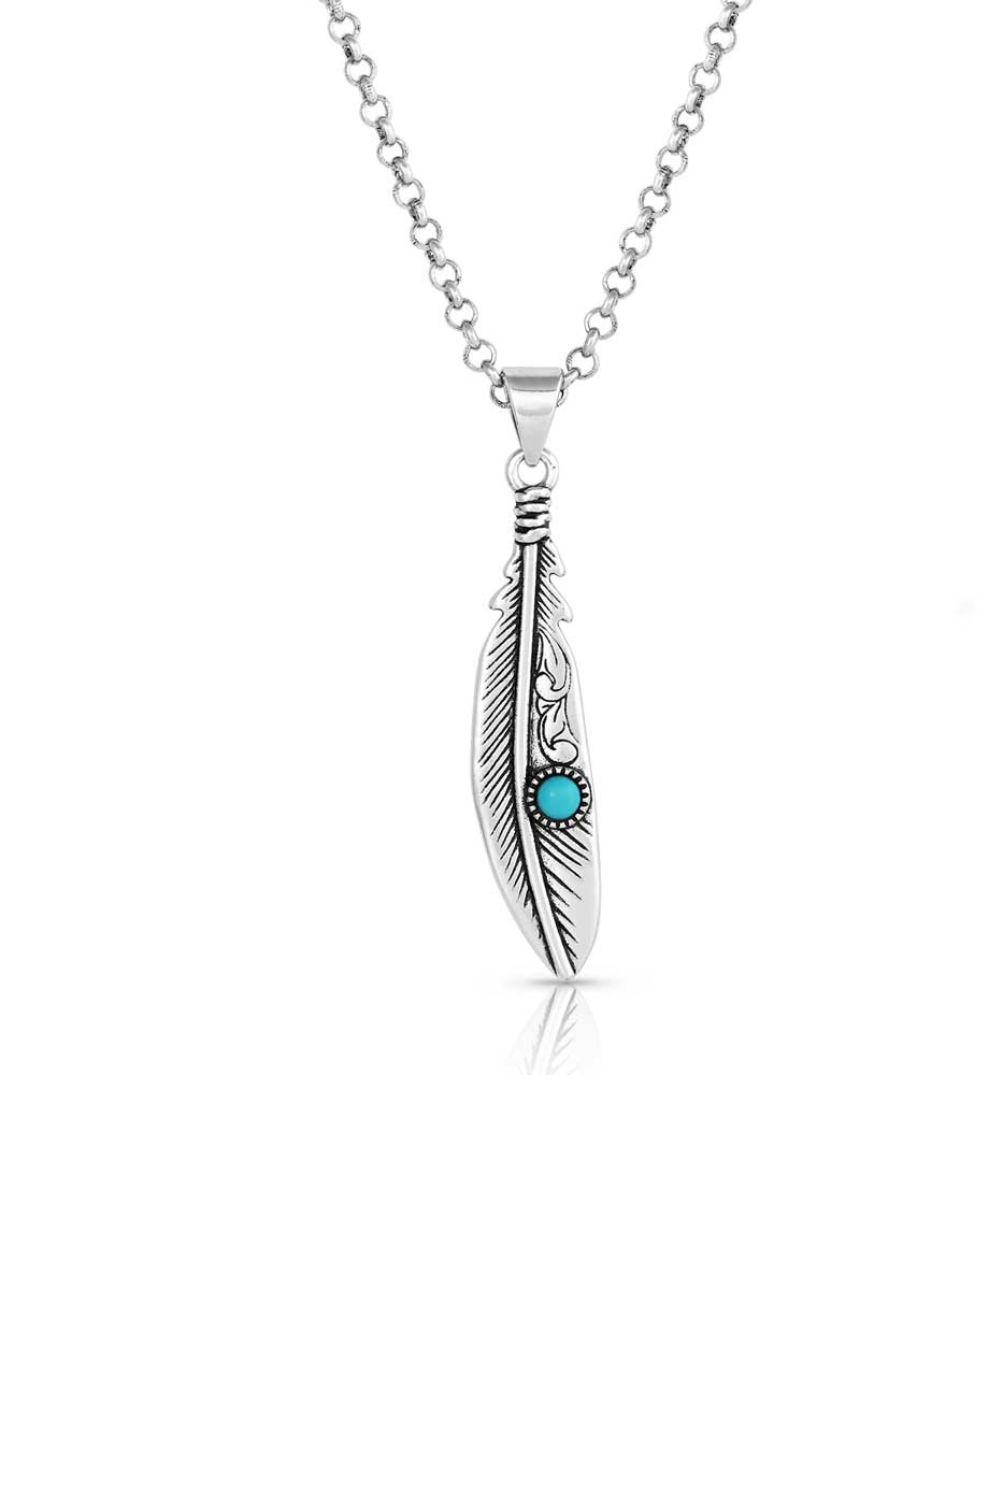 Solo Flight Turquoise Feather Necklace